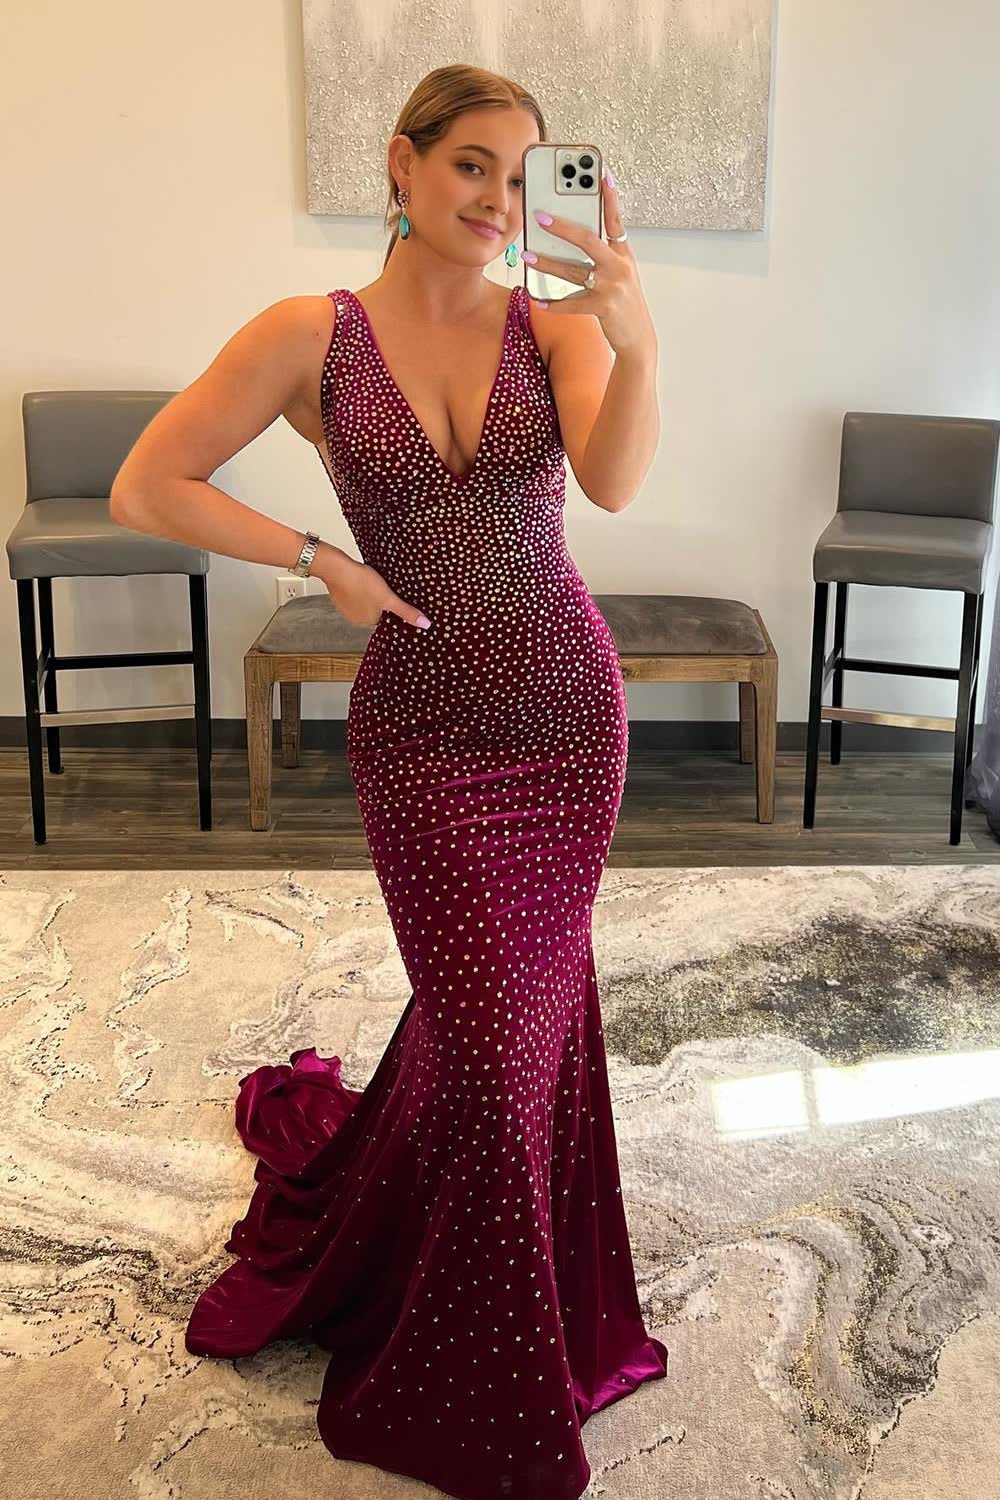 Sparkly Fuchsia Sequins Backless Mermaid Long Prom Dress